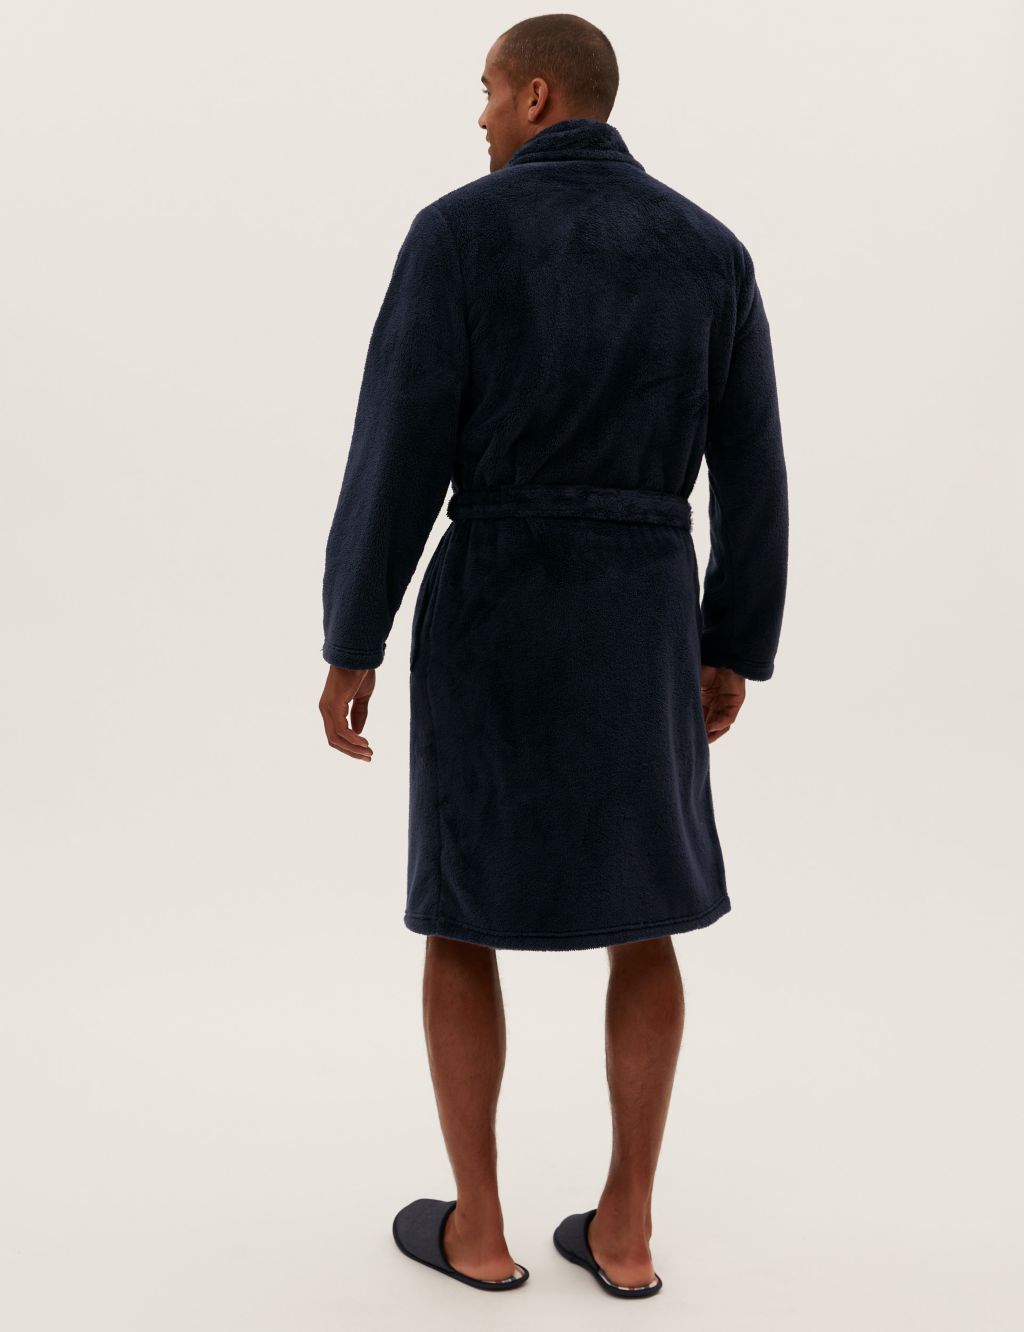 Fleece Supersoft Dressing Gown image 5